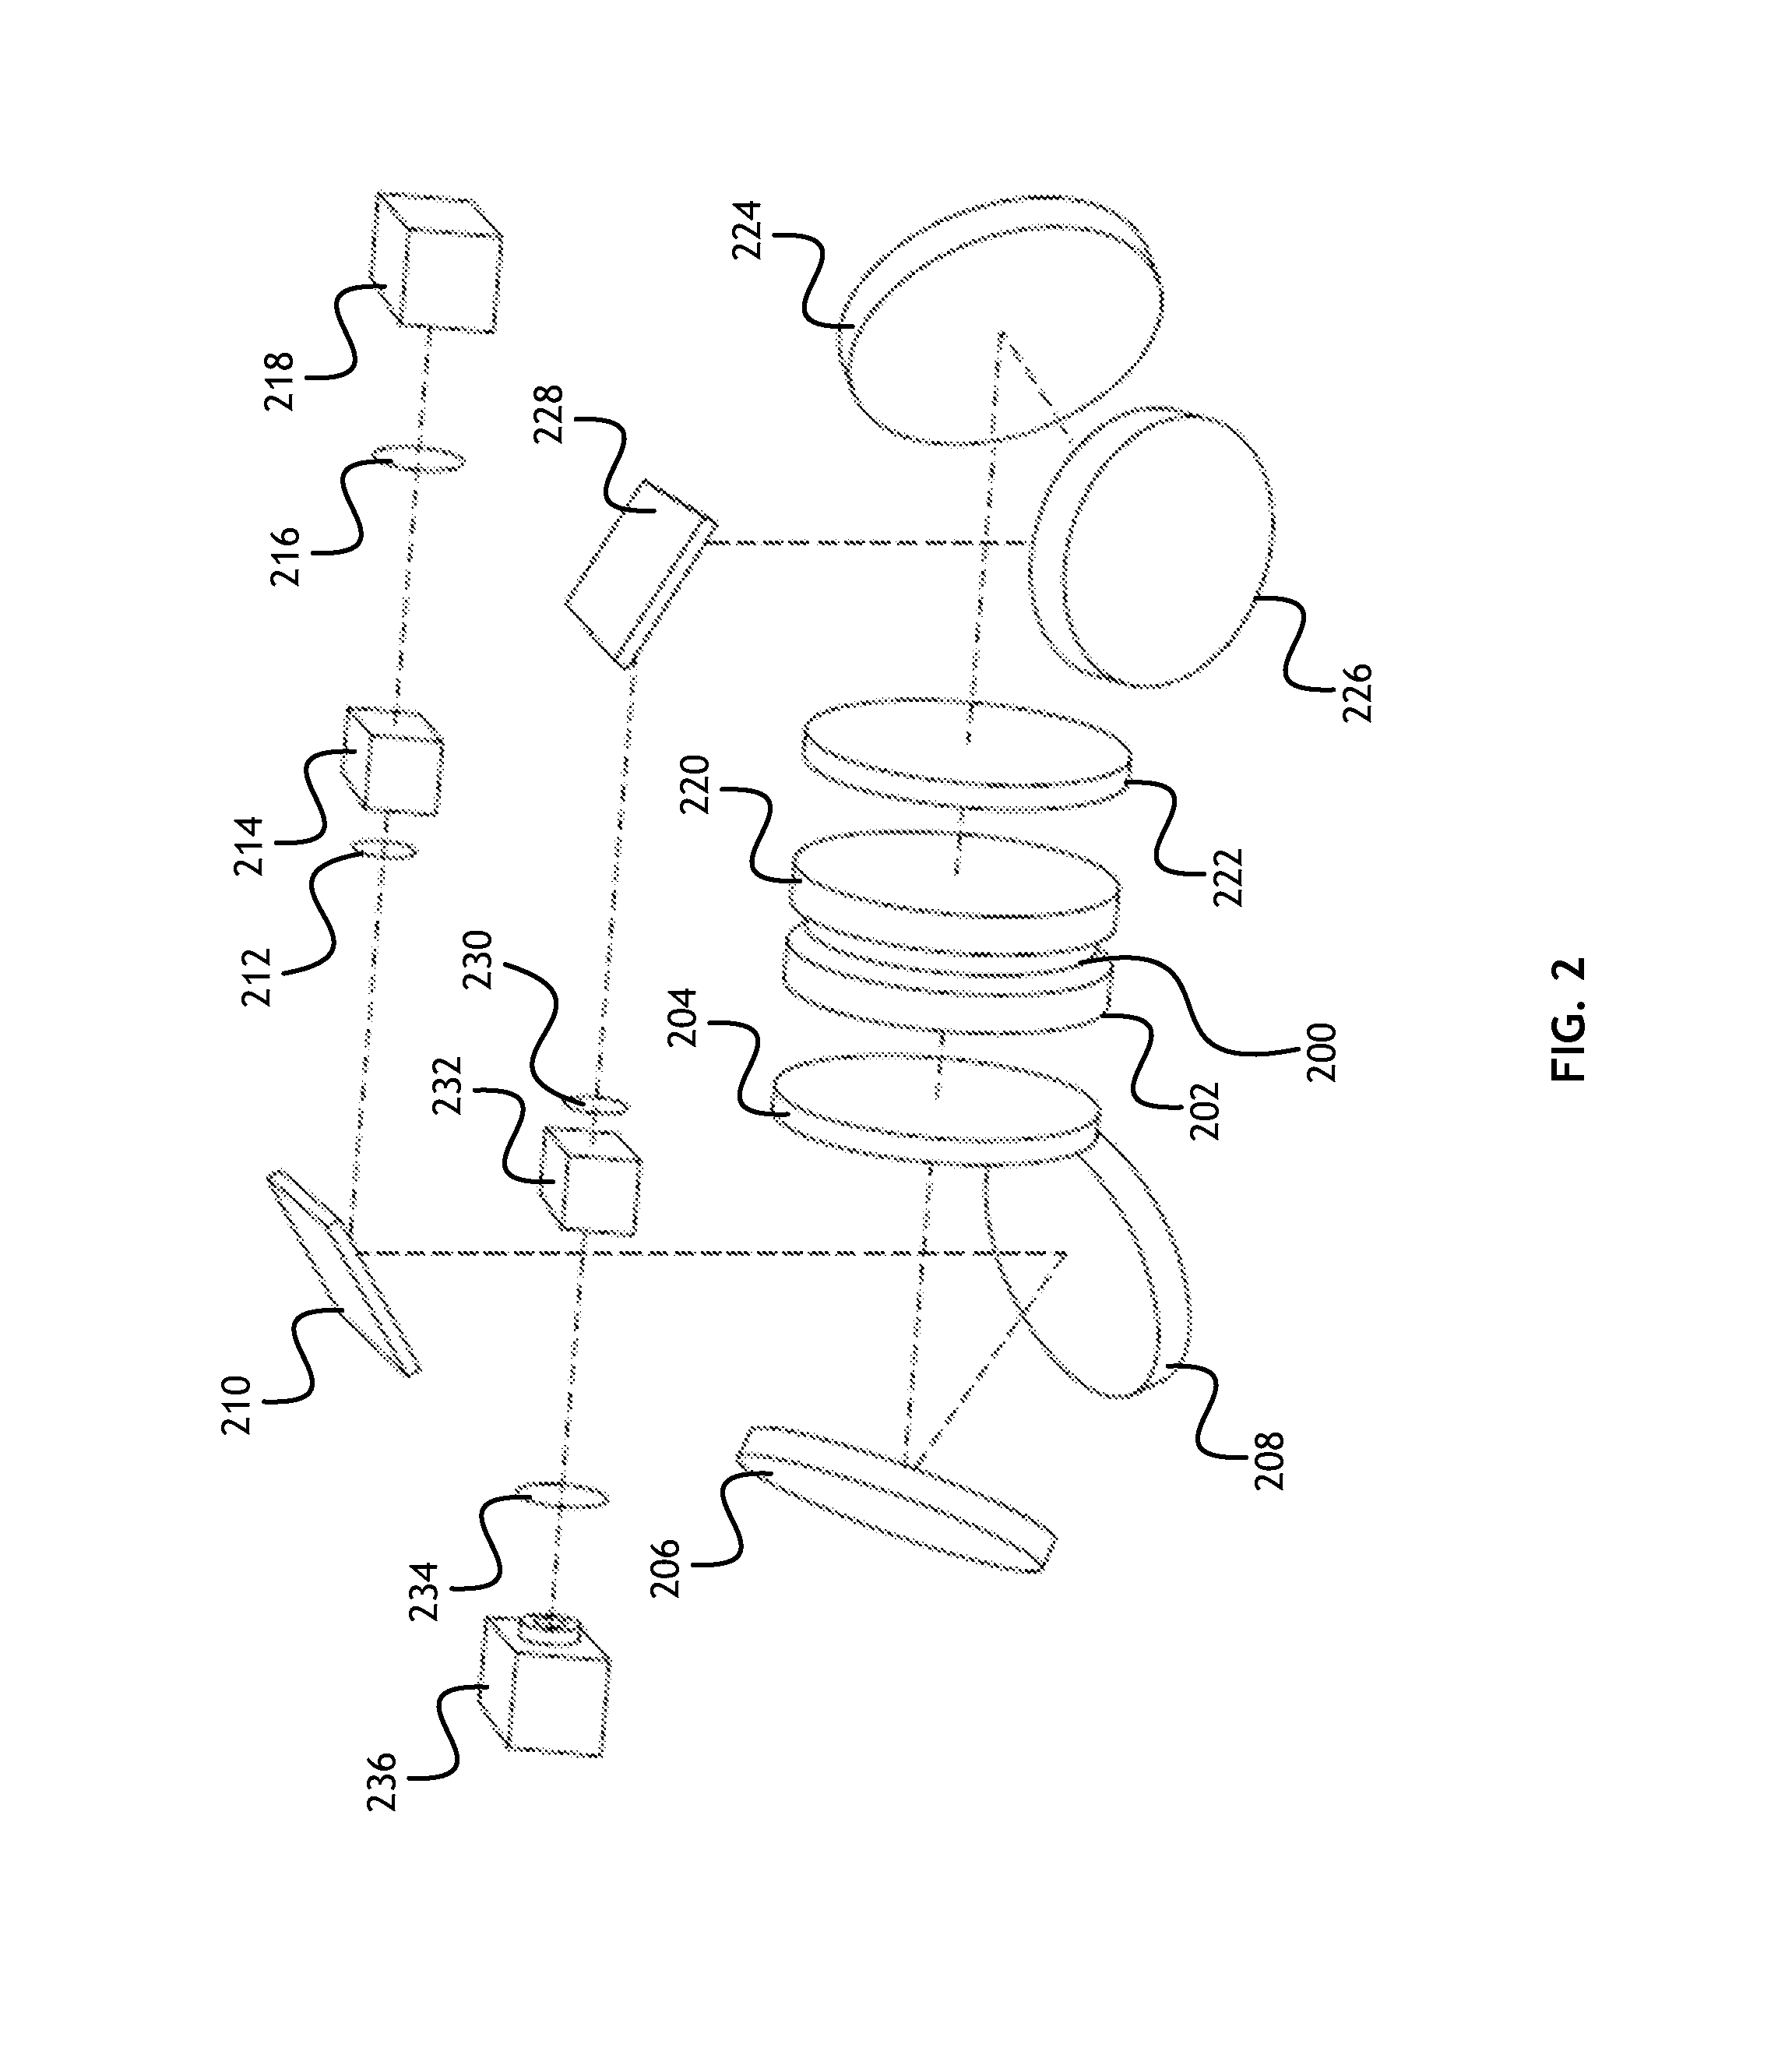 Method and apparatus to fold optics in tools for measuring shape and/or thickness of a large and thin substrate